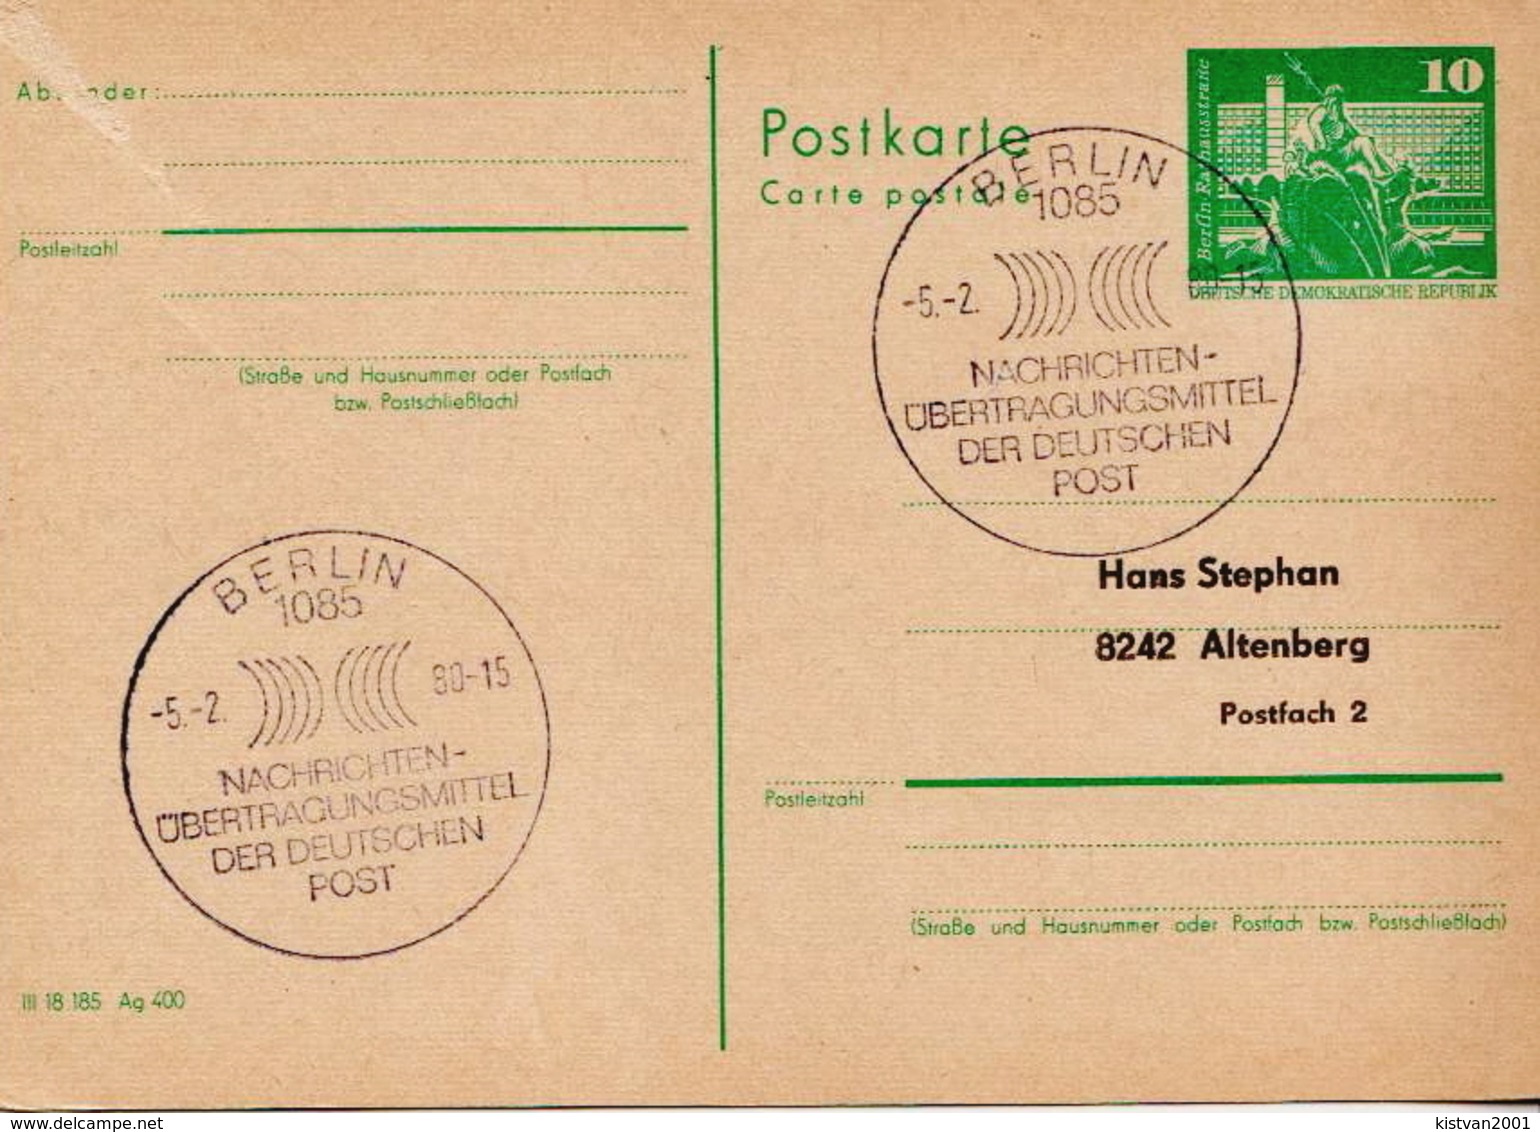 Germany / DDR Cancelled Postal Stationery Card - Postcards - Used